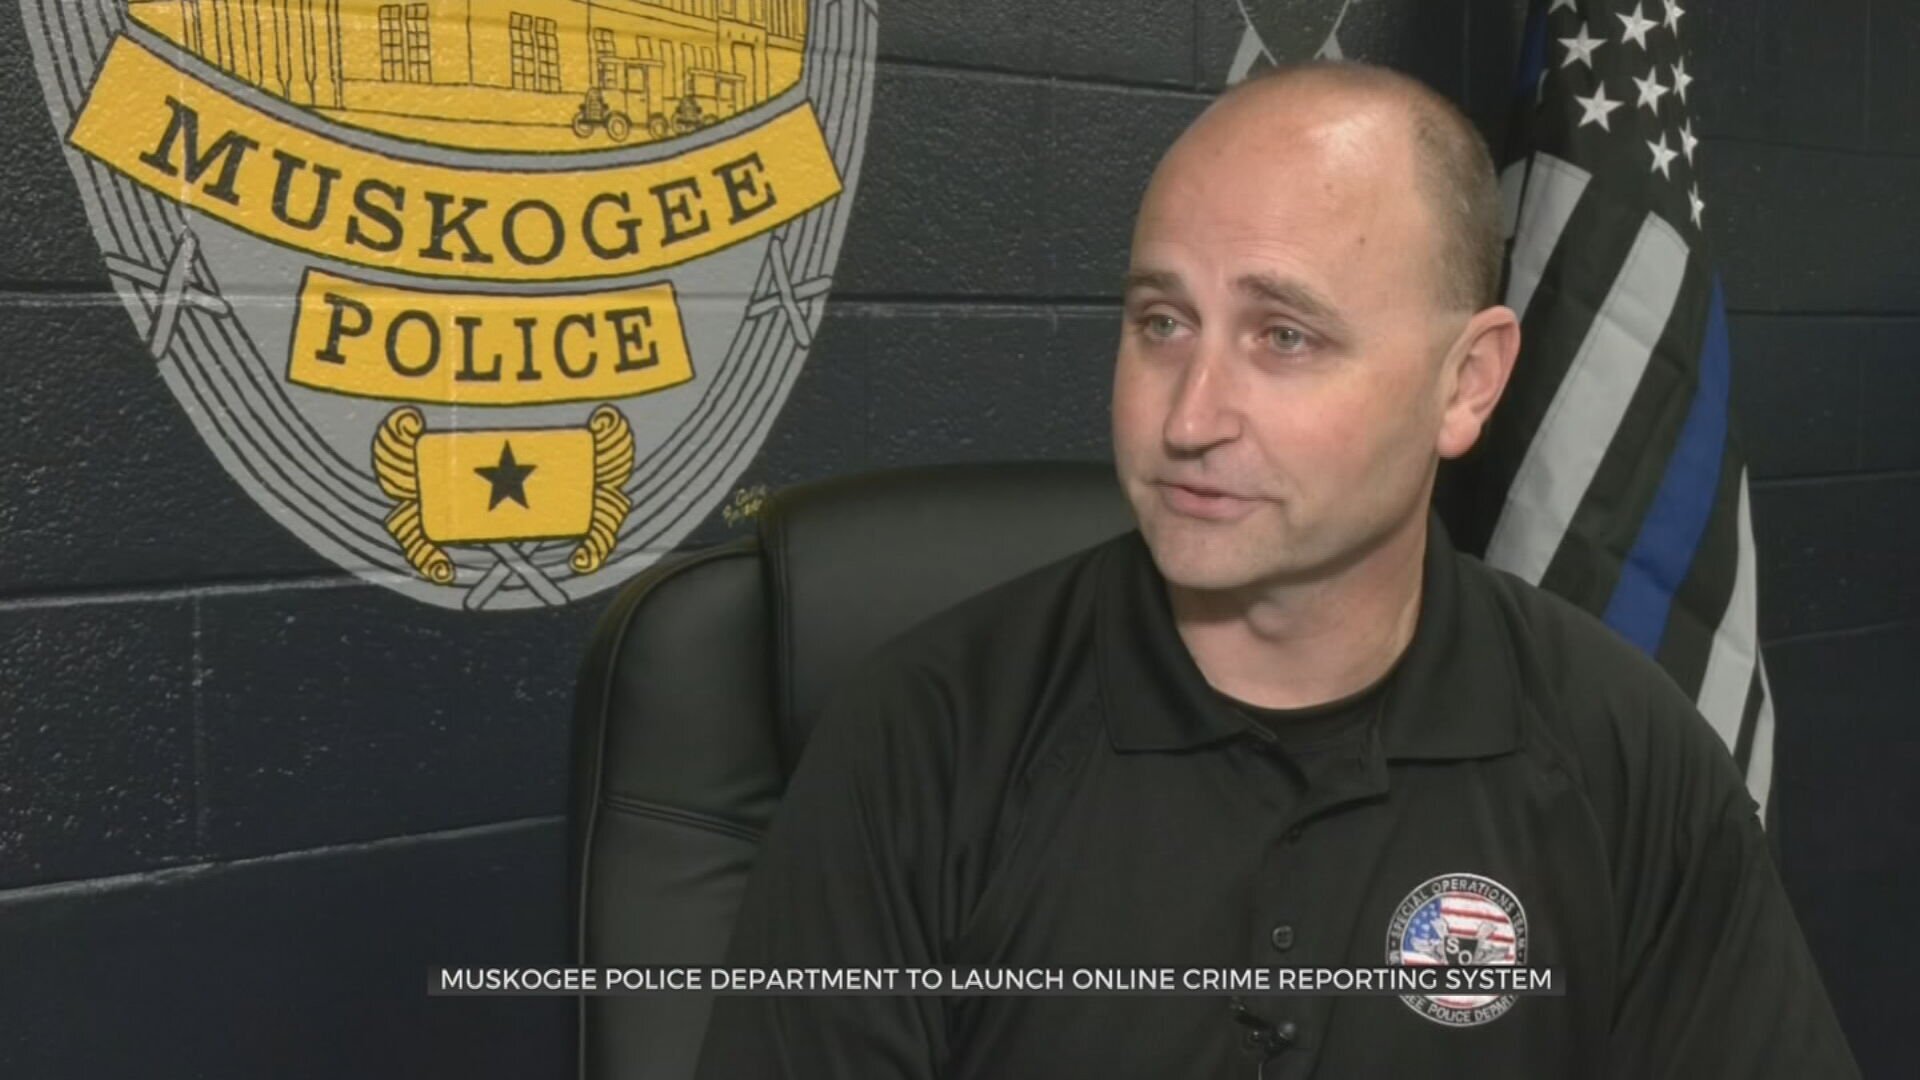 Muskogee Police Department To Launch Online Crime Reporting System 